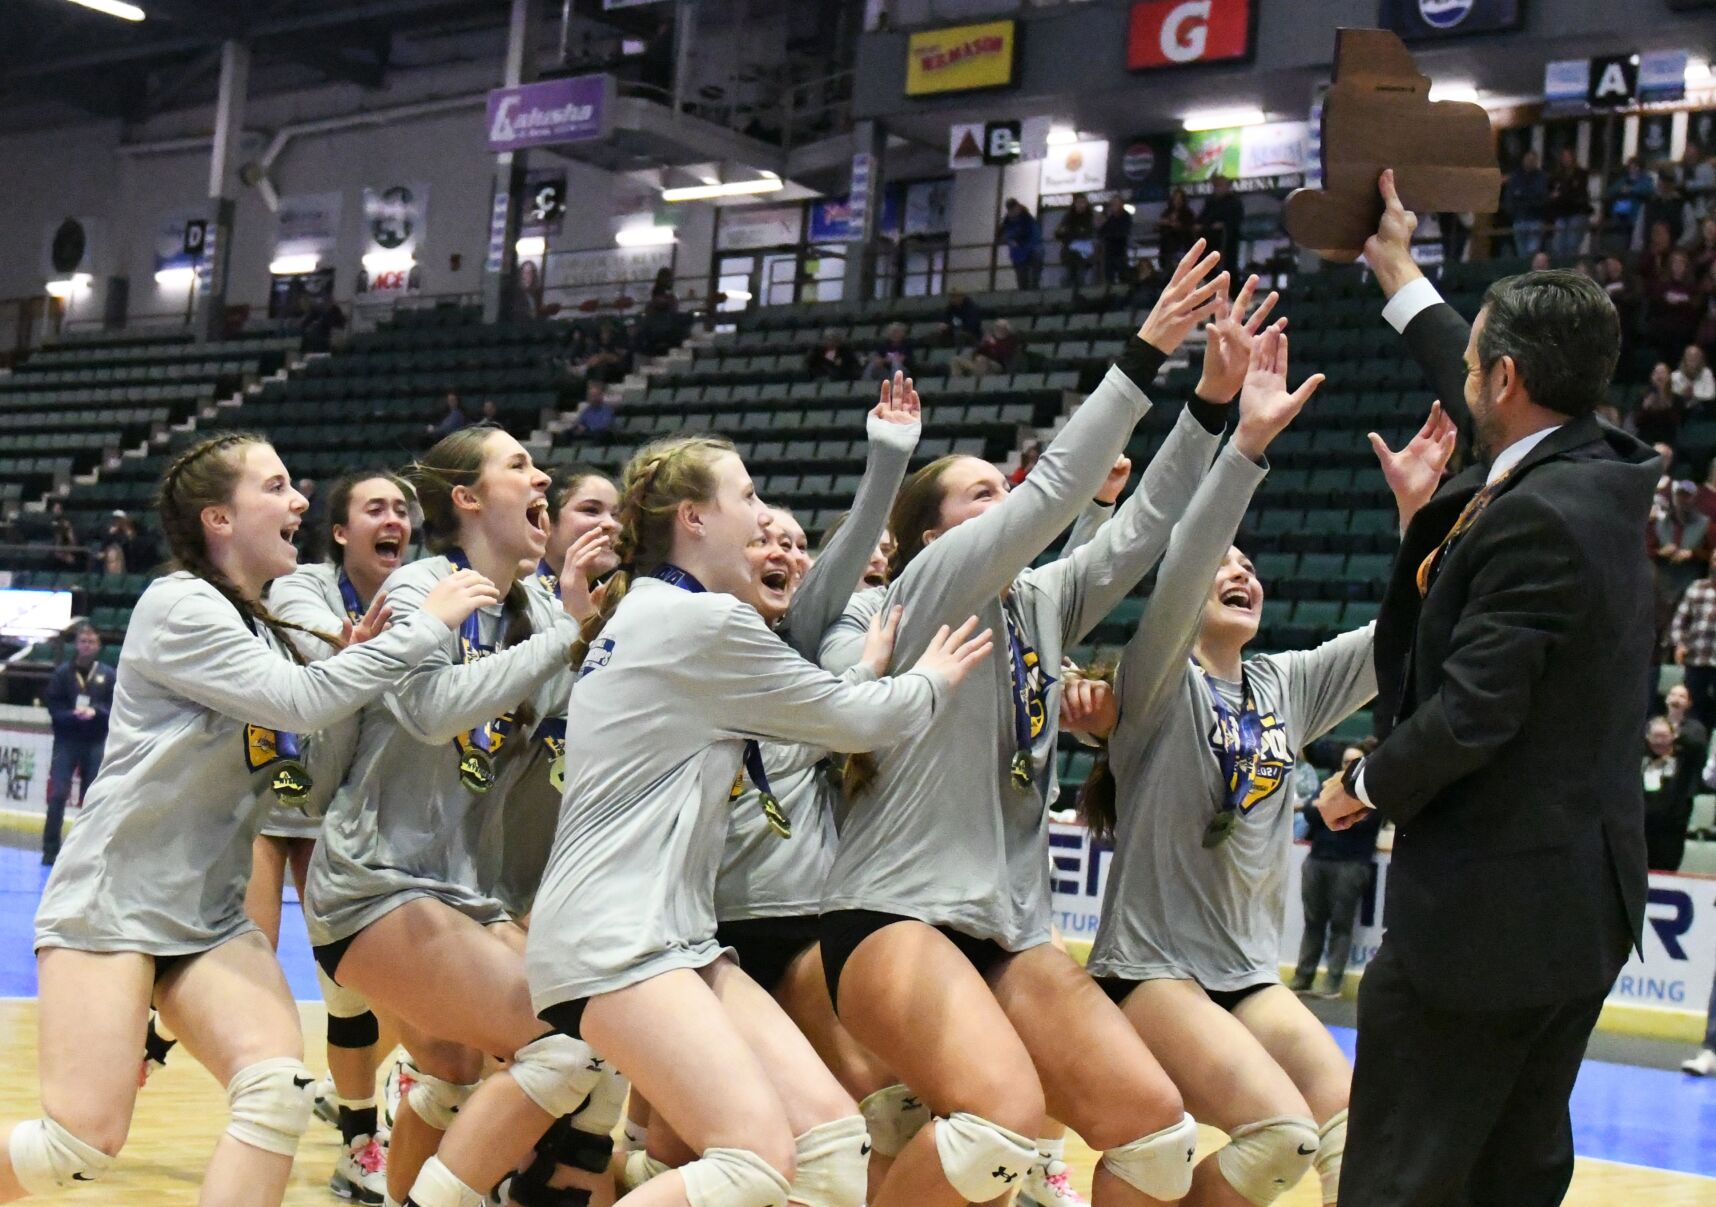 Burnt Hills-Ballston Lake Girls’ Volleyball Team Clinches 9th State Championship Win